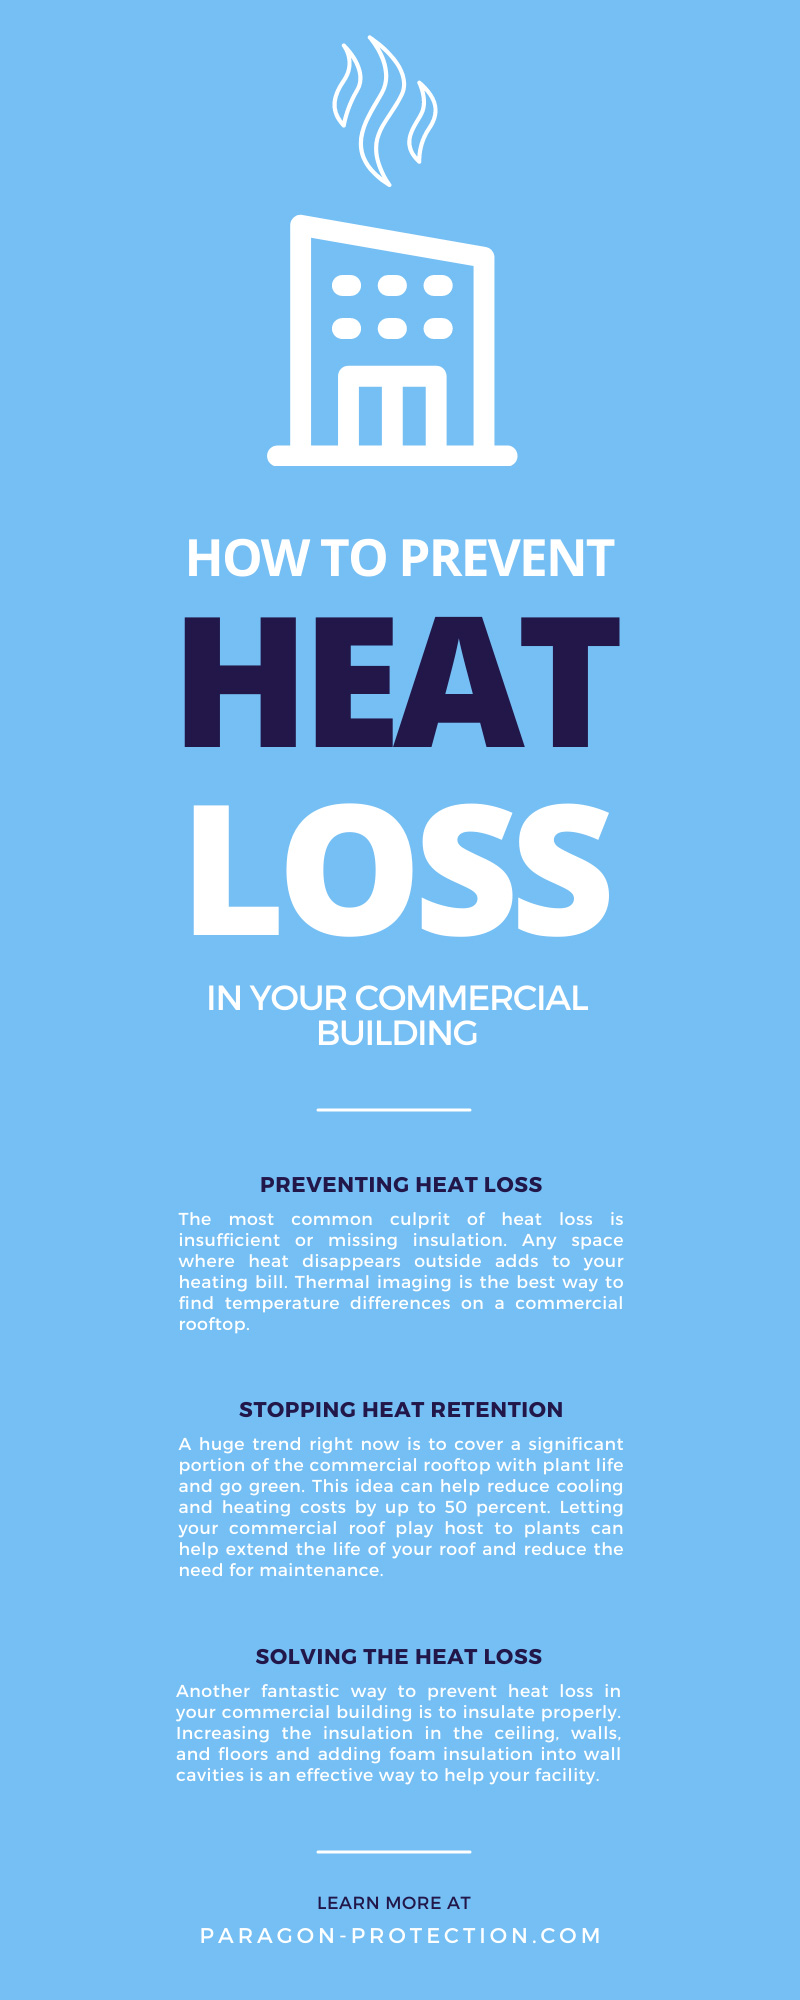 How To Prevent Heat Loss in Your Commercial Building